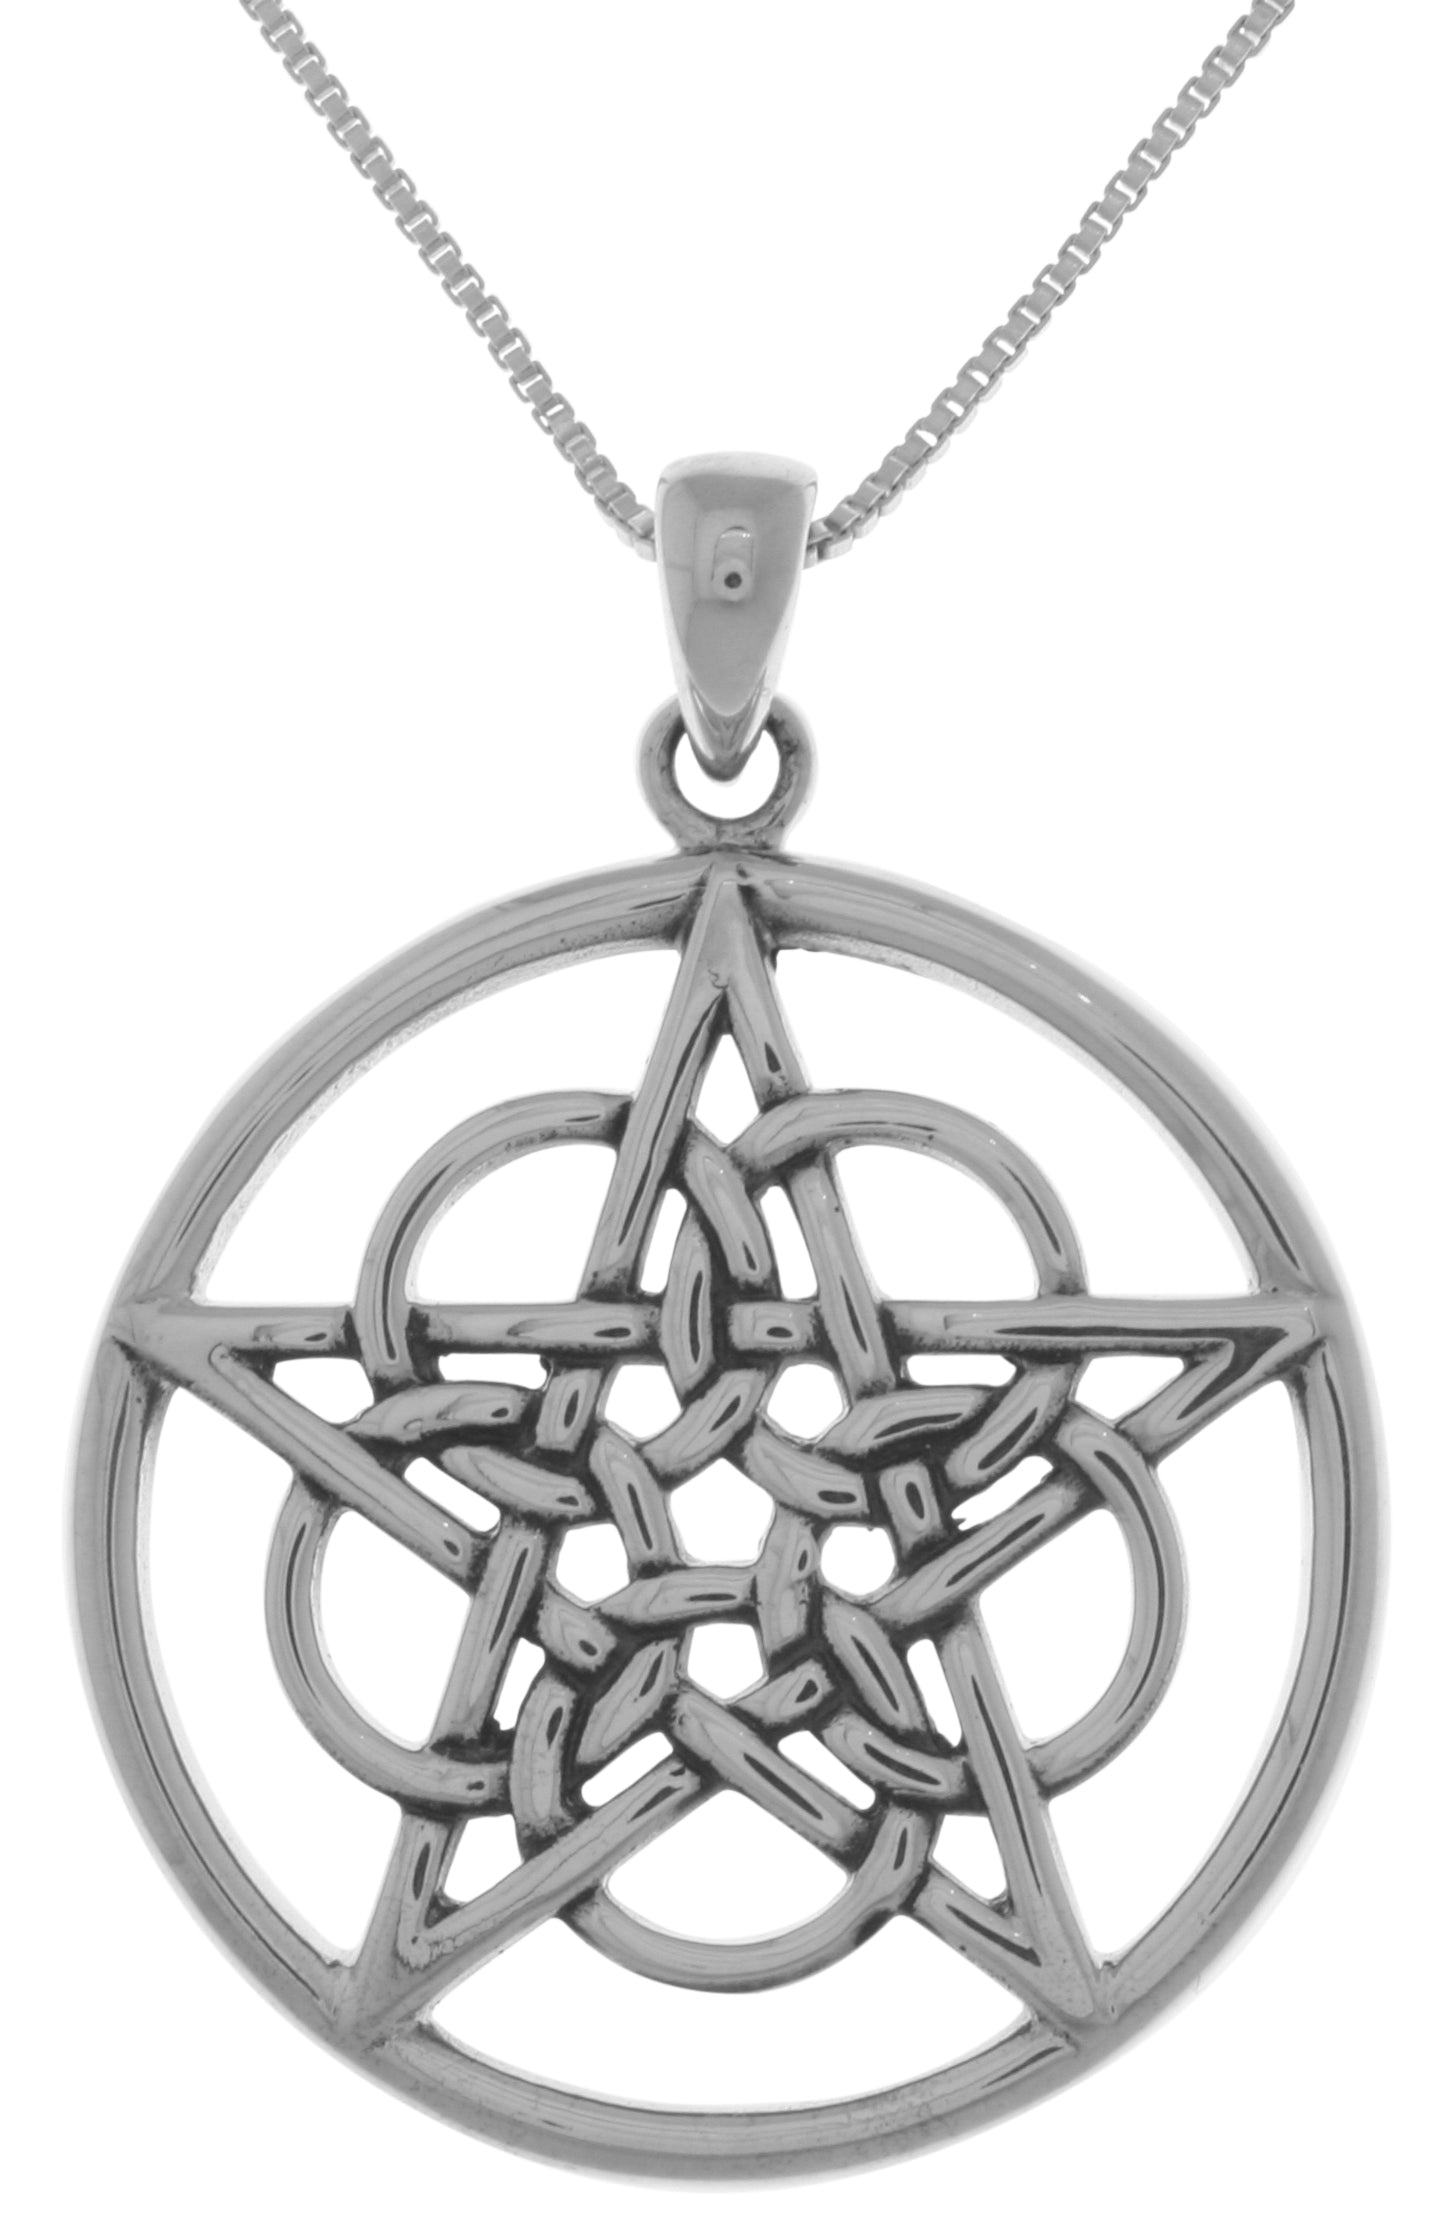 Jewelry Trends Sterling Silver Mystical Ringed Star Pentacle Pendant on 18 Inch Box Chain Necklace